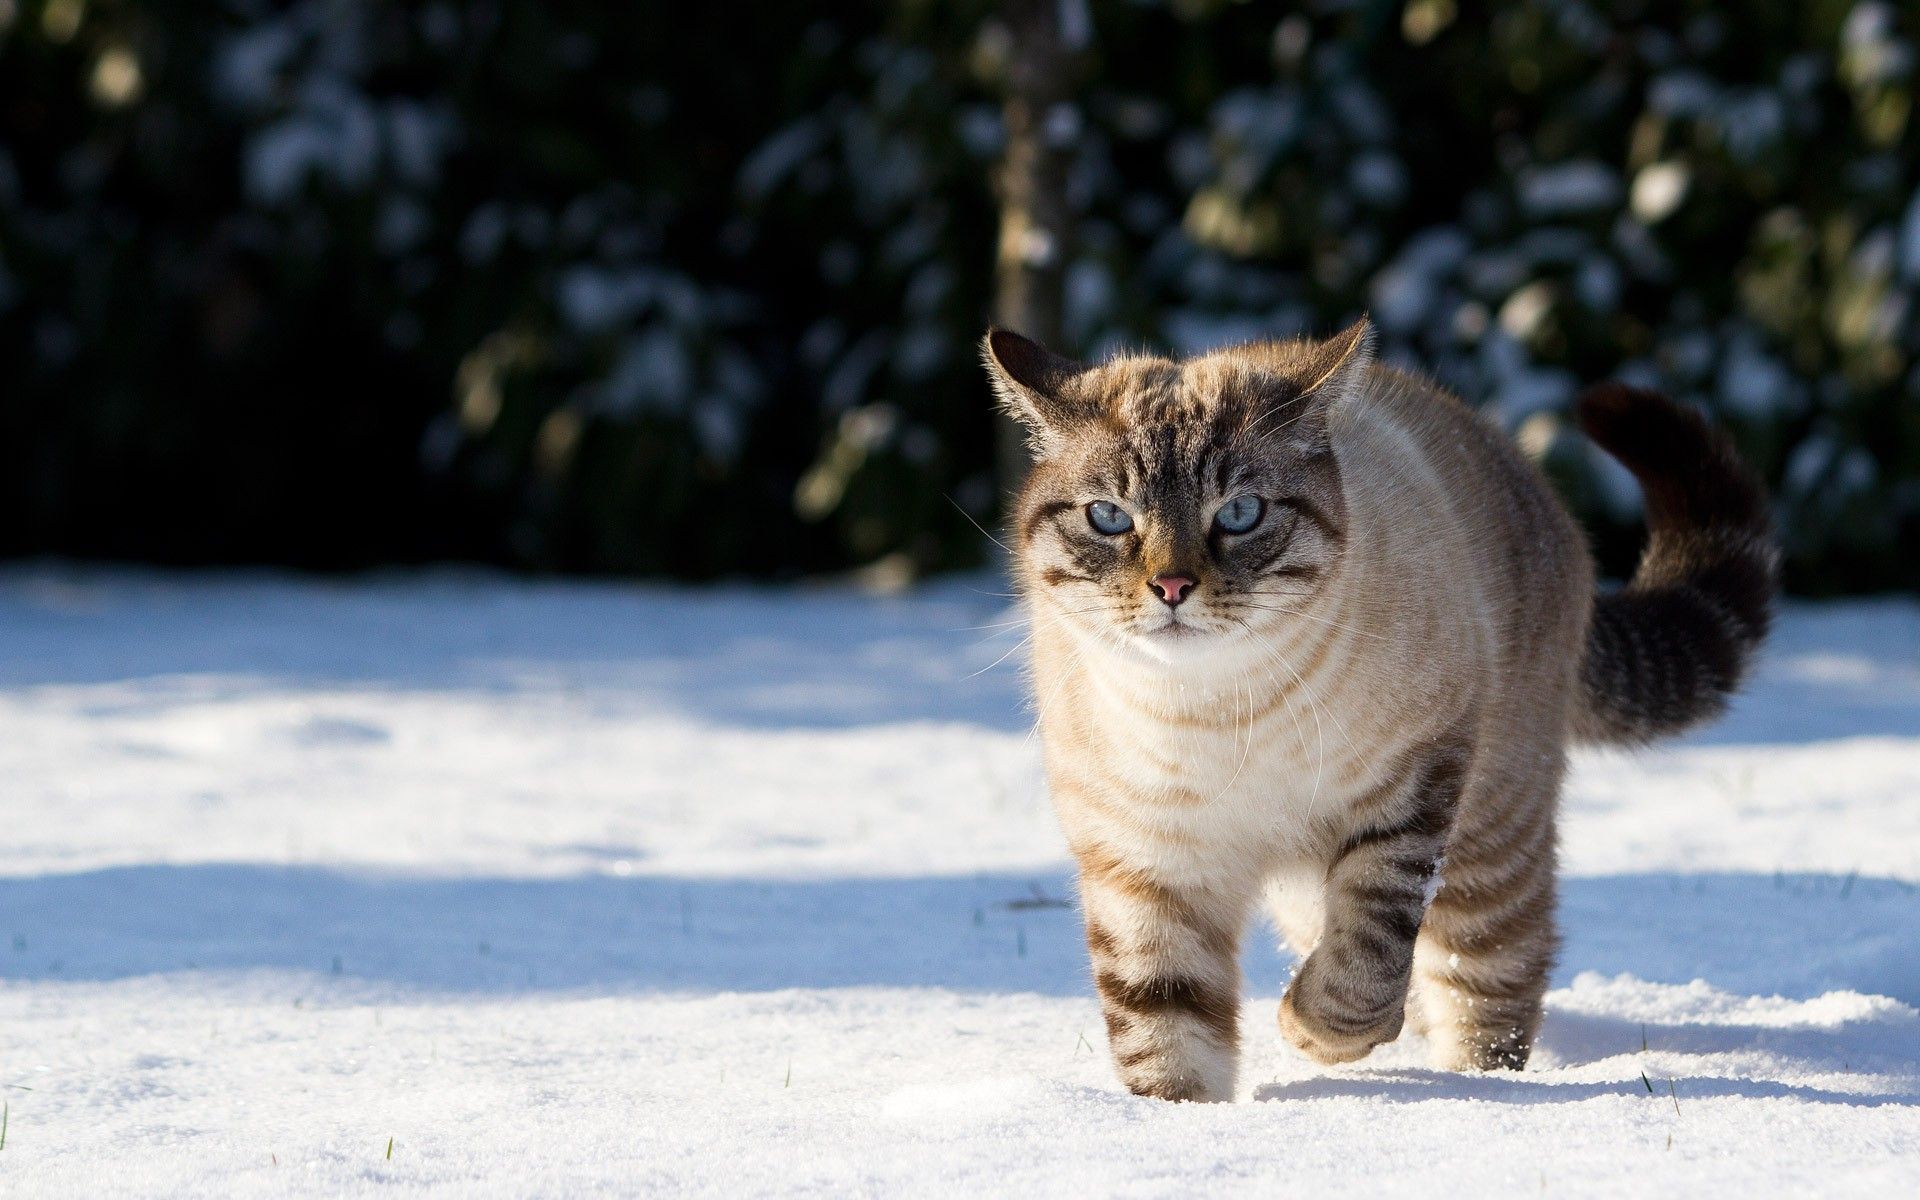 Snow Cats Wallpaper 1920x1200 Snow, Cats, Blue, Eyes, Animals. Cats, Siamese cats, Cool cats